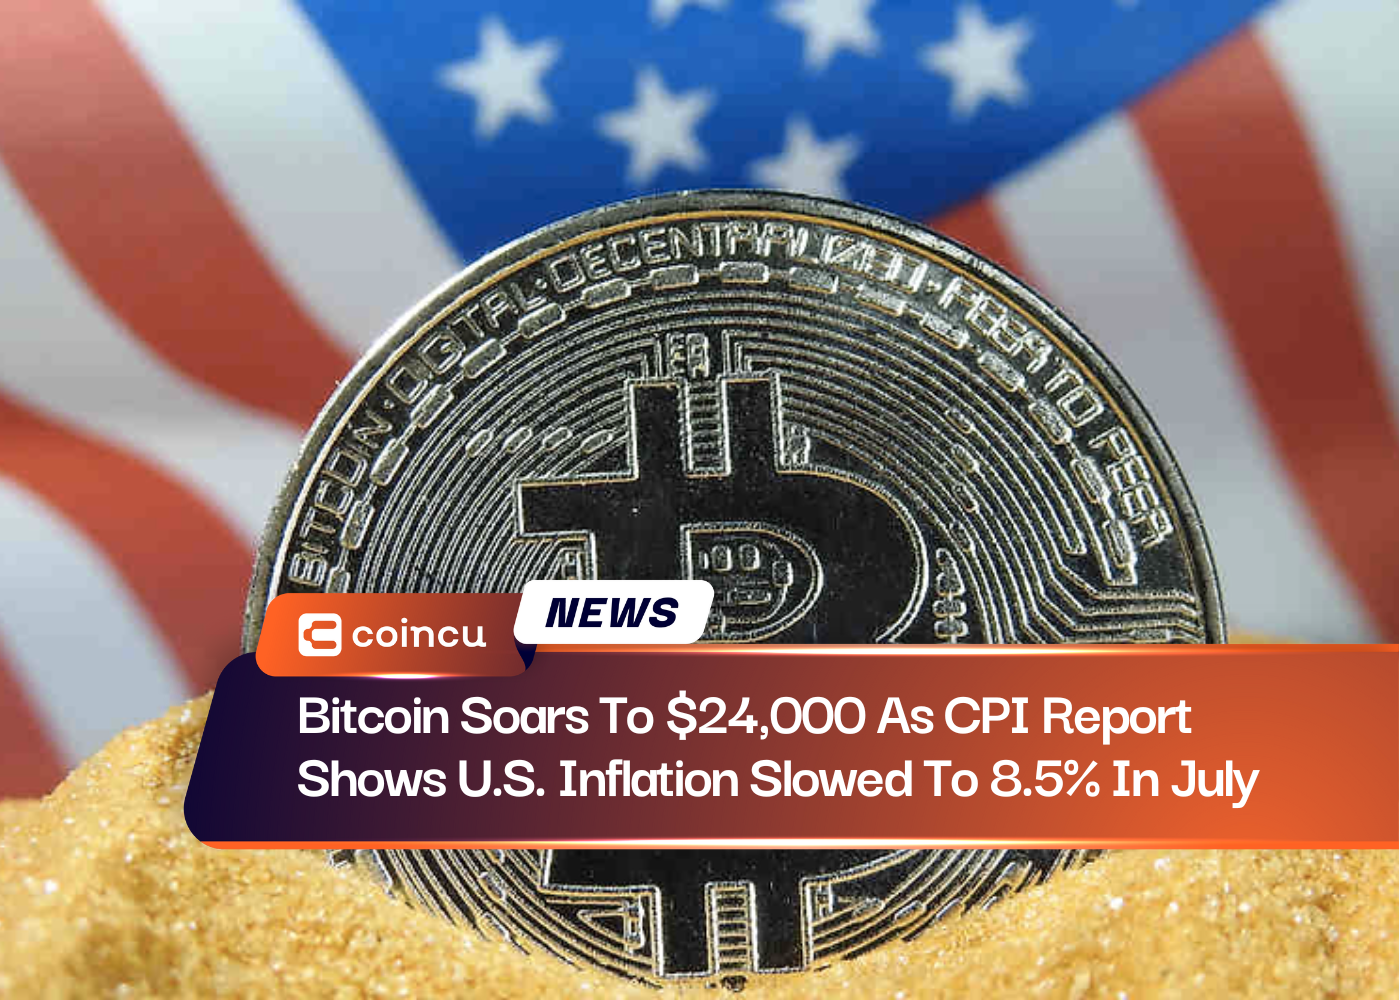 Bitcoin Soars To $24,000 As CPI Report Shows U.S. Inflation Slowed To 8.5% In July